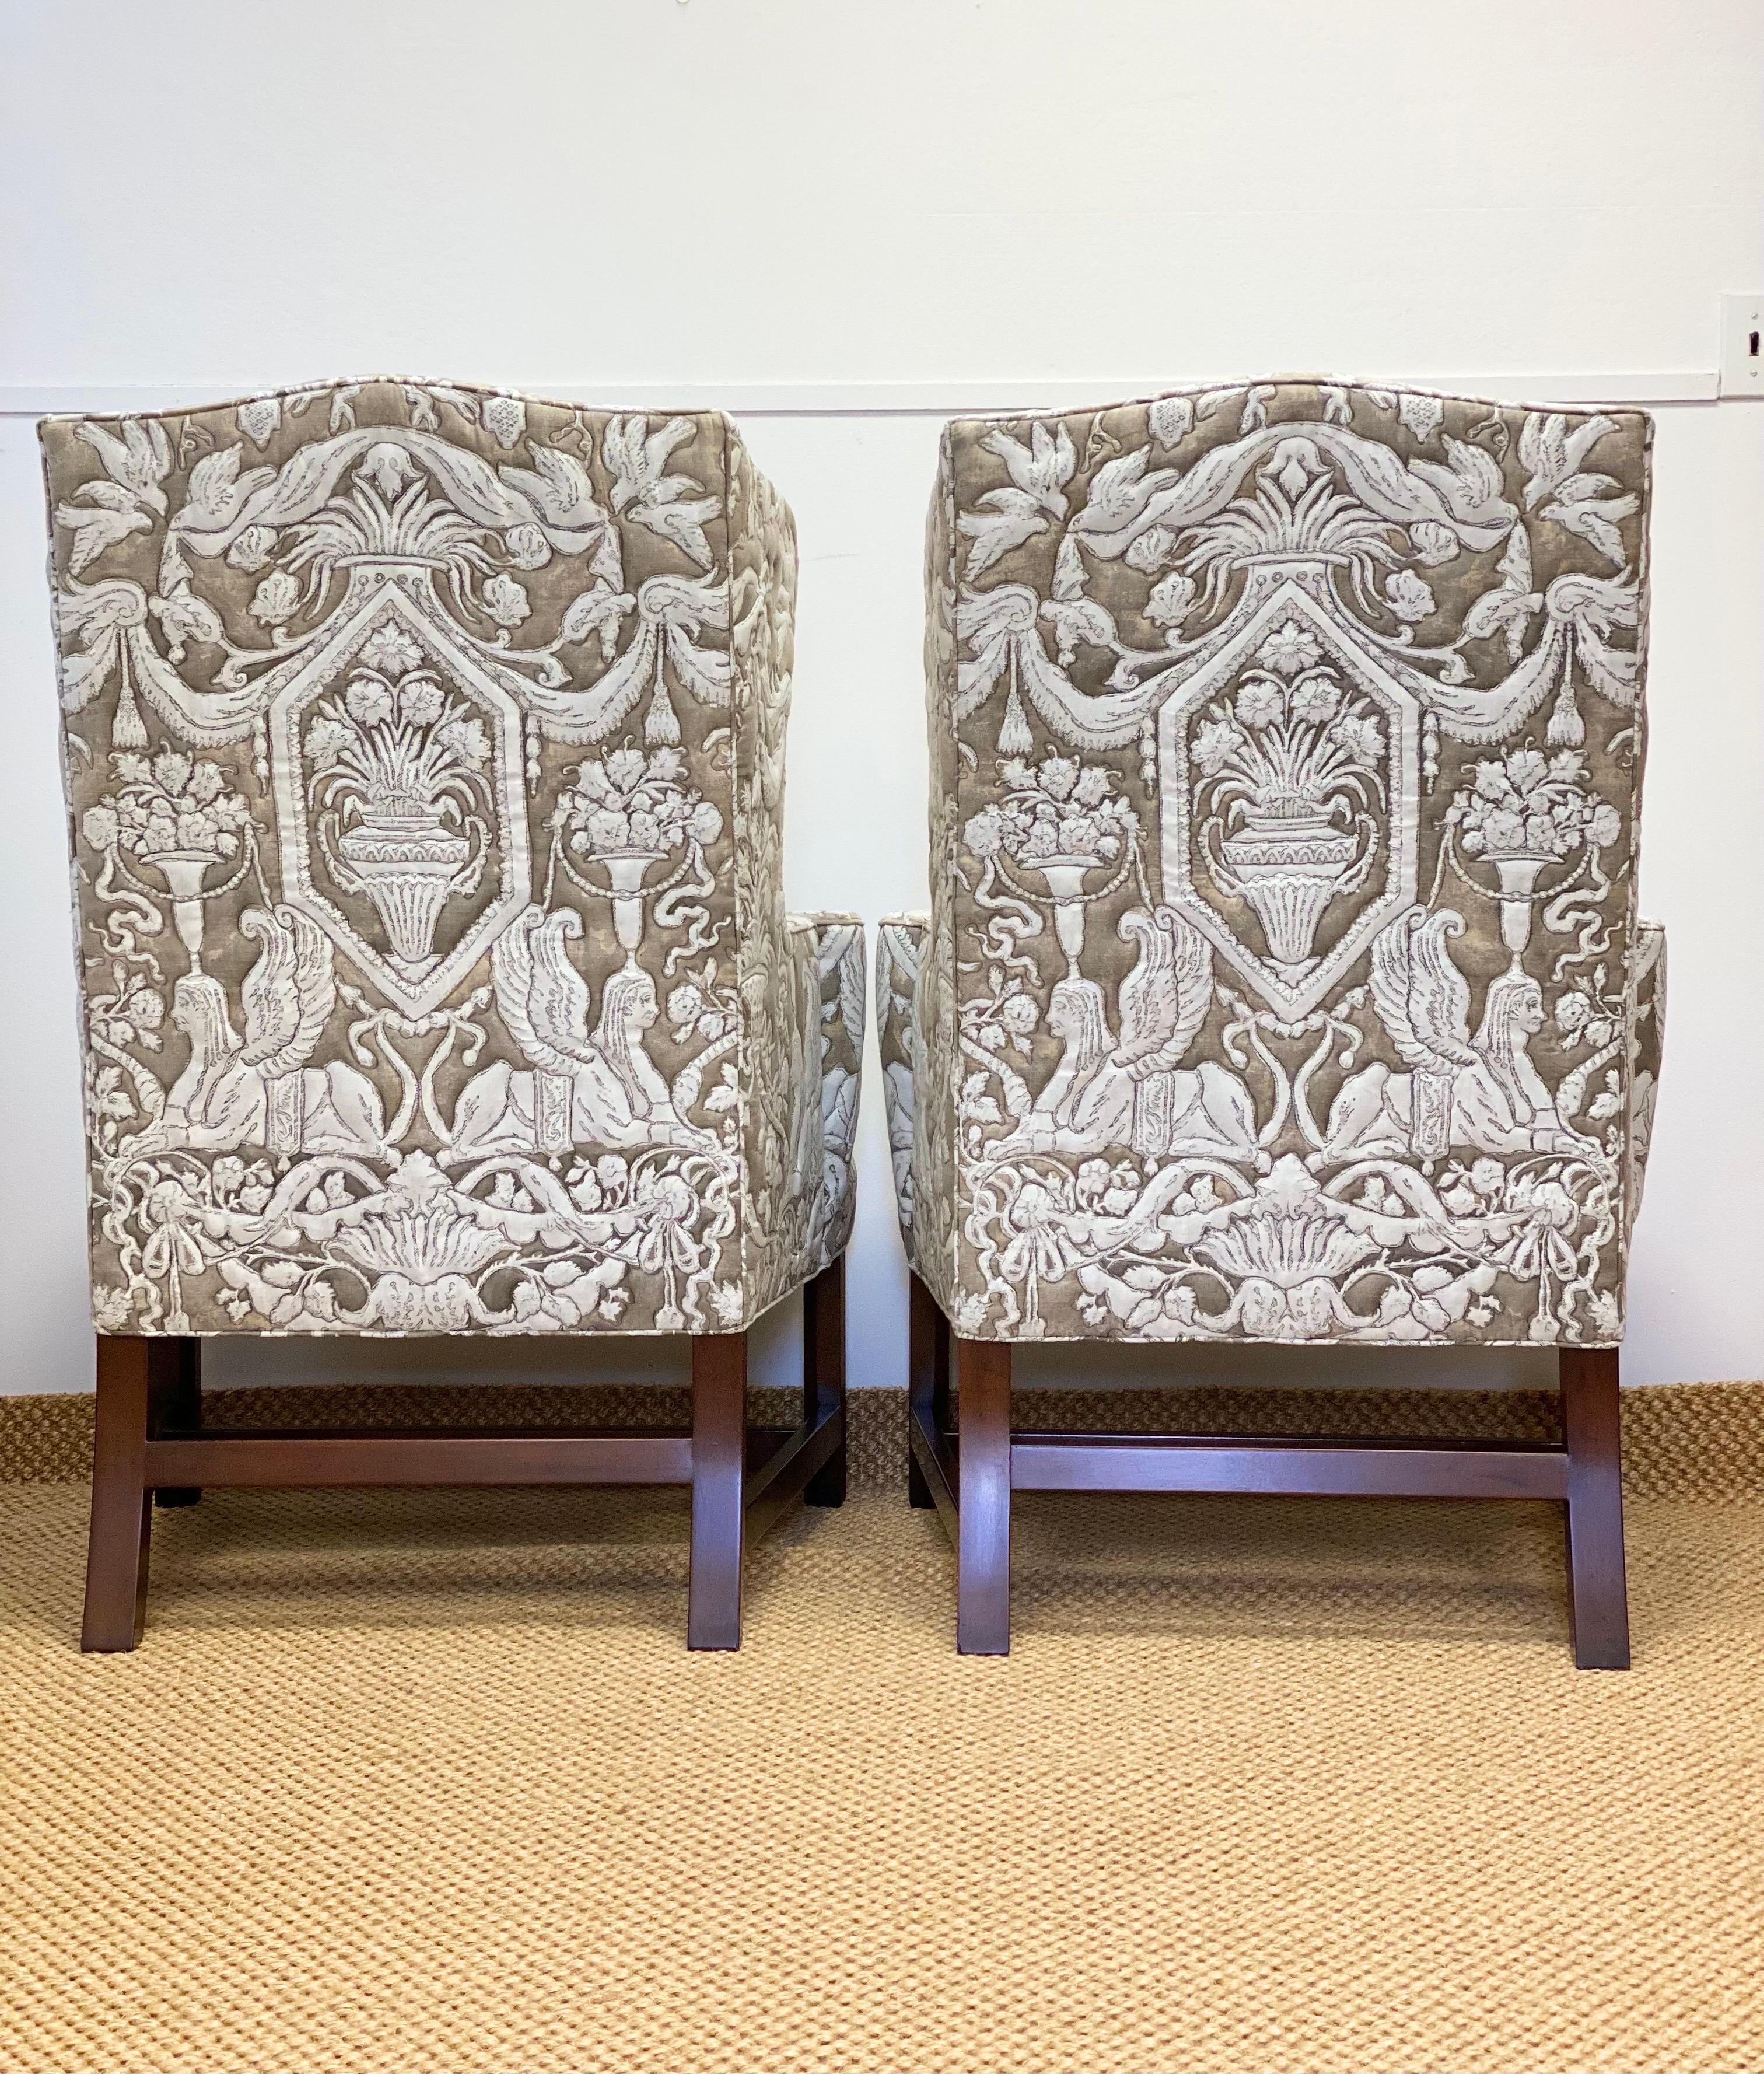 American Colonial 1960s Kittinger Cw12 Colonial Williamsburg Neoclassical Wingback Chairs – a Pair For Sale